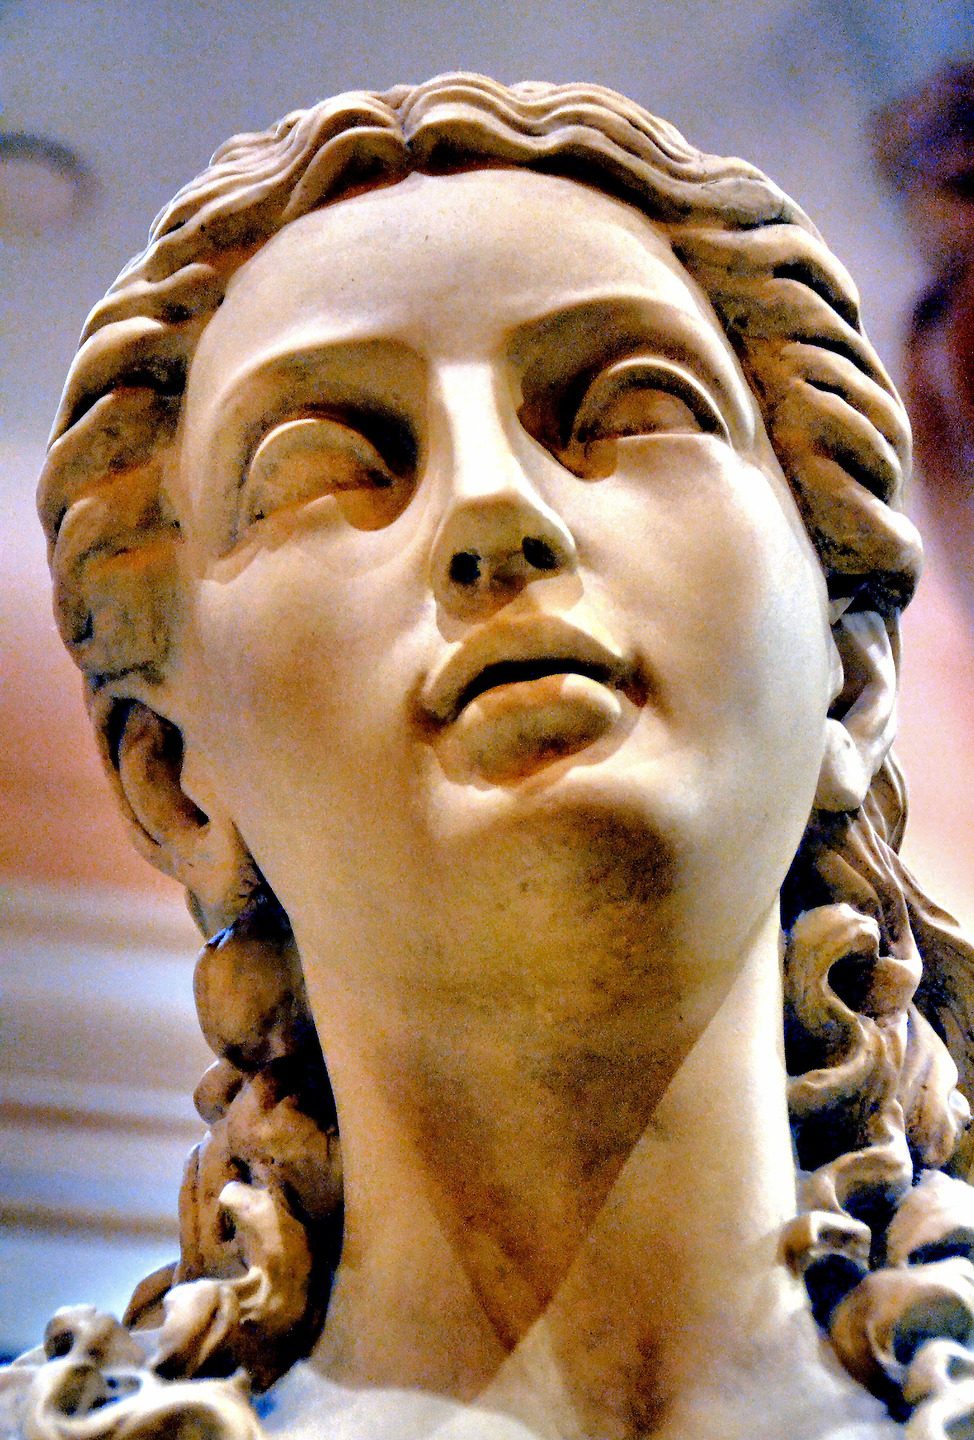 Roman Woman with Braided Hair Statue from Faces on the Strip at Las Vegas,  Nevada - Encircle